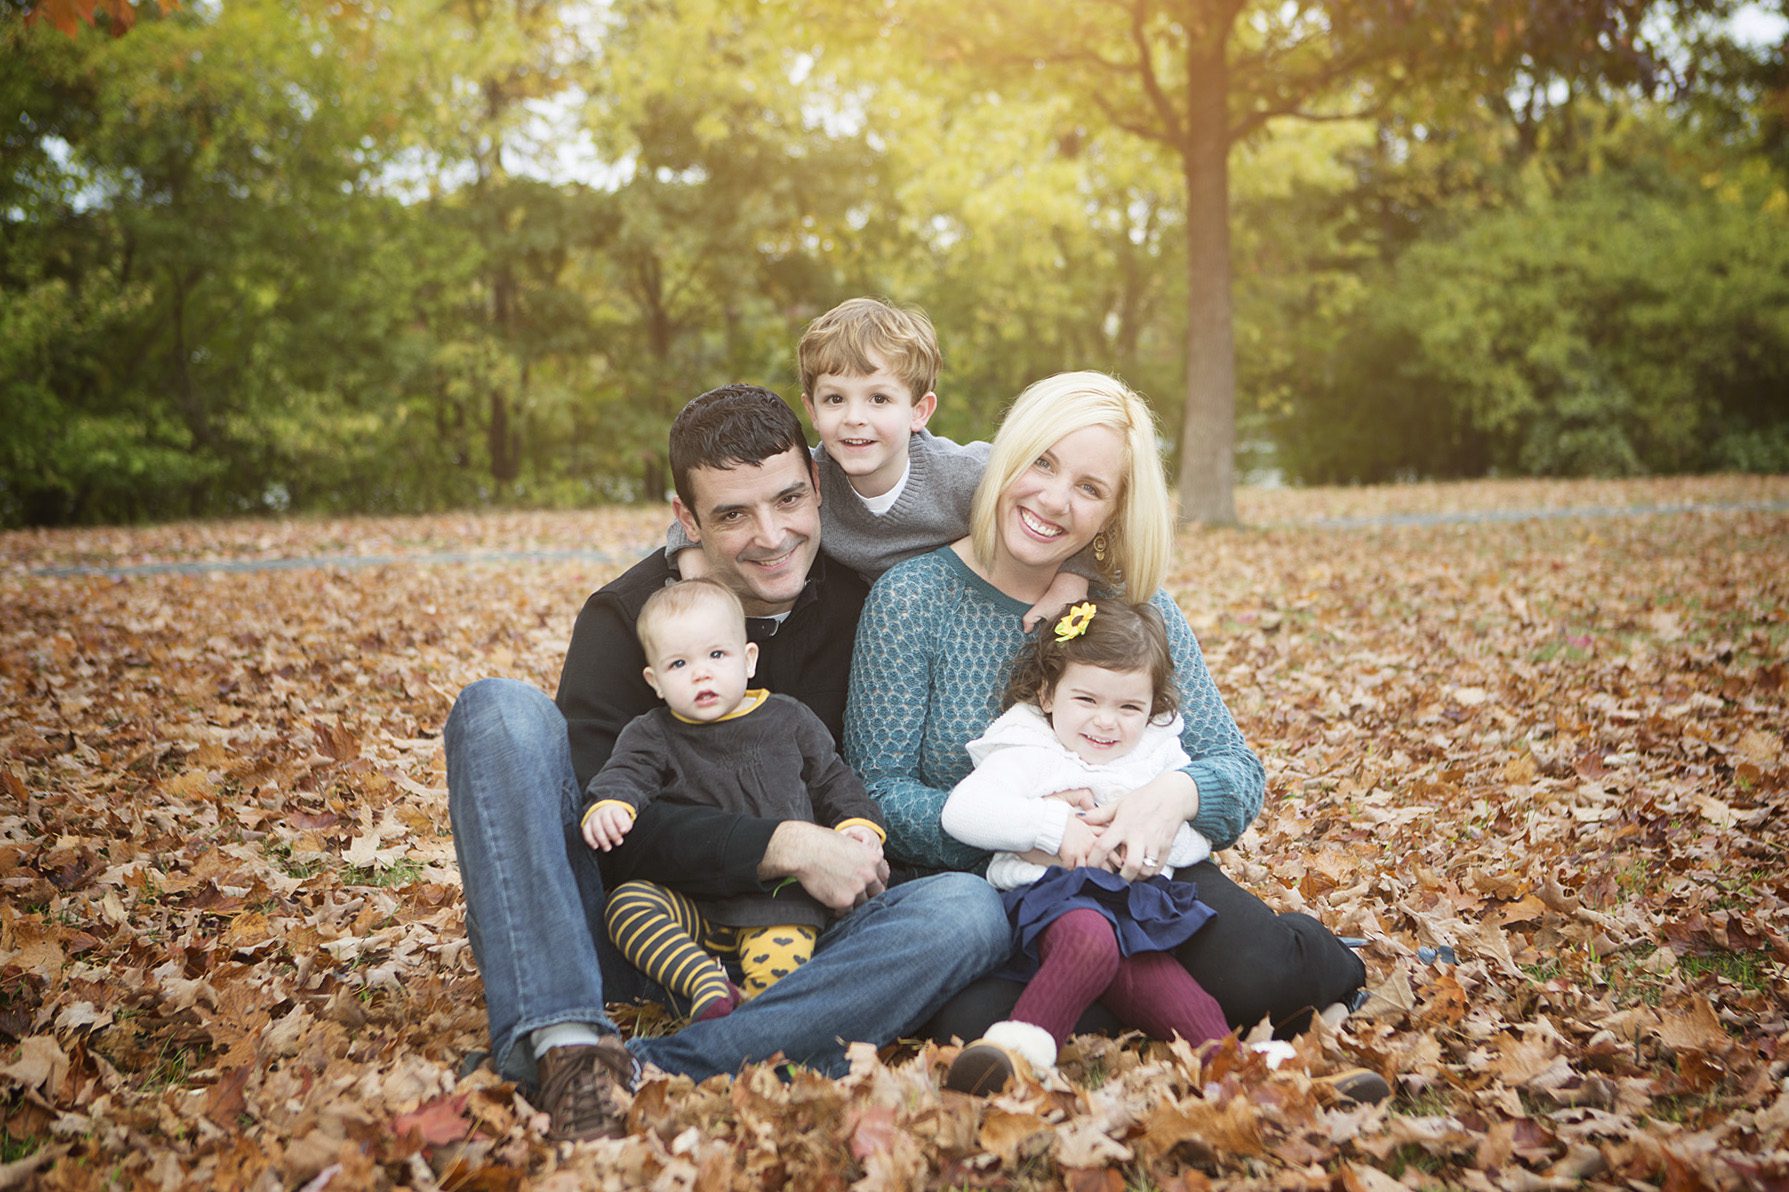 Outdoor Fall Family Photo Clothing Ideas :: 6 Tips · Crabapple Photography